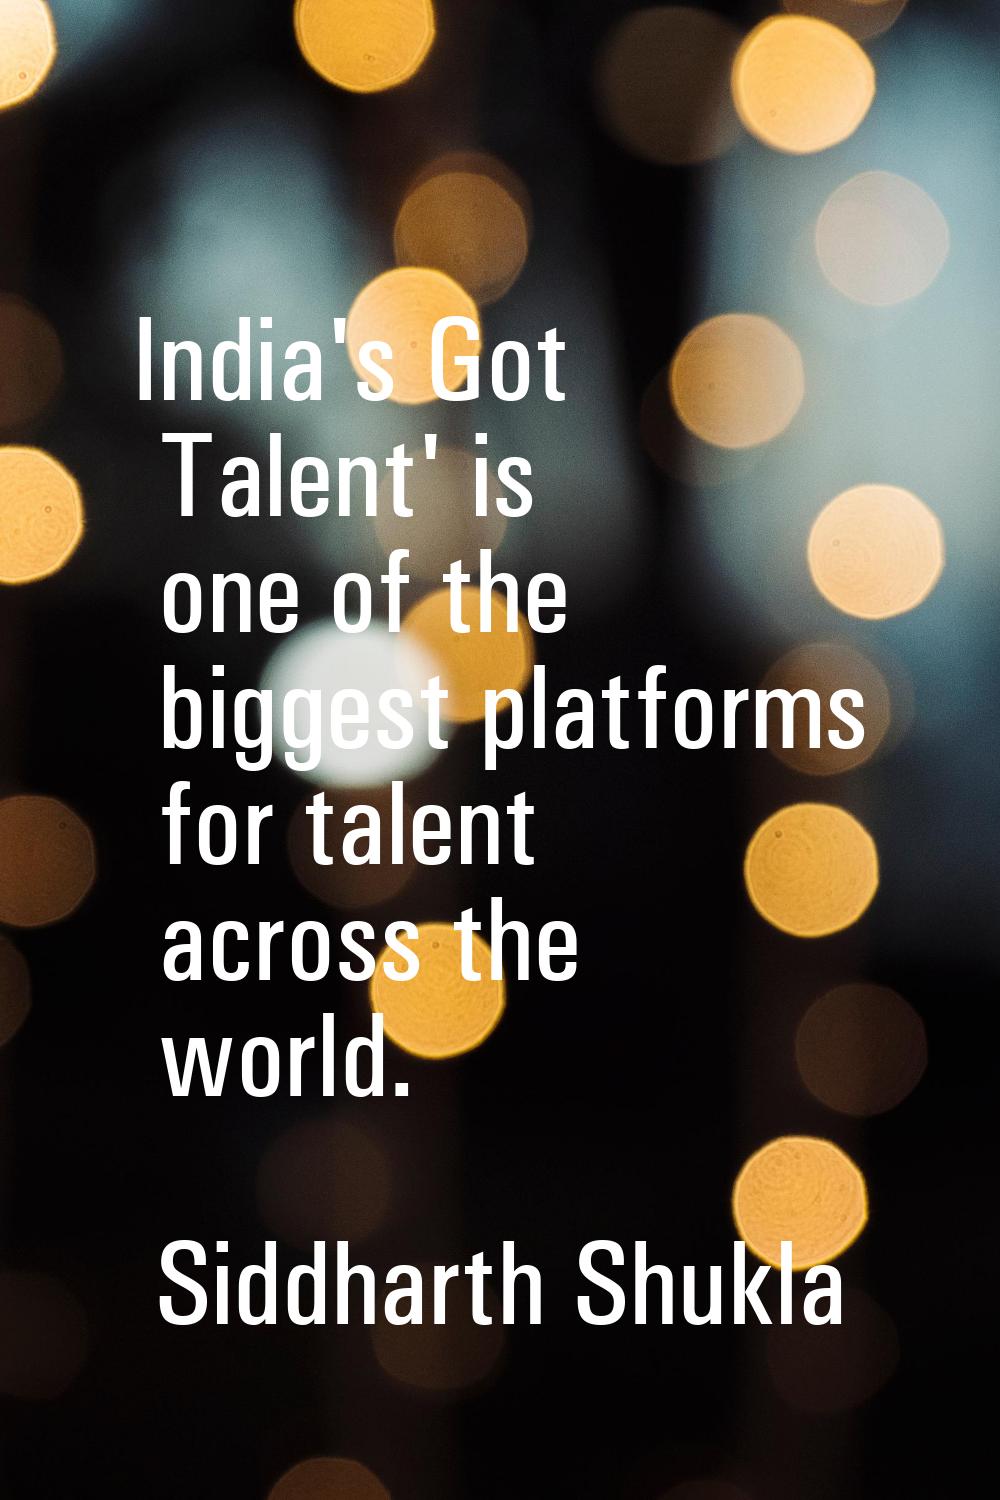 India's Got Talent' is one of the biggest platforms for talent across the world.